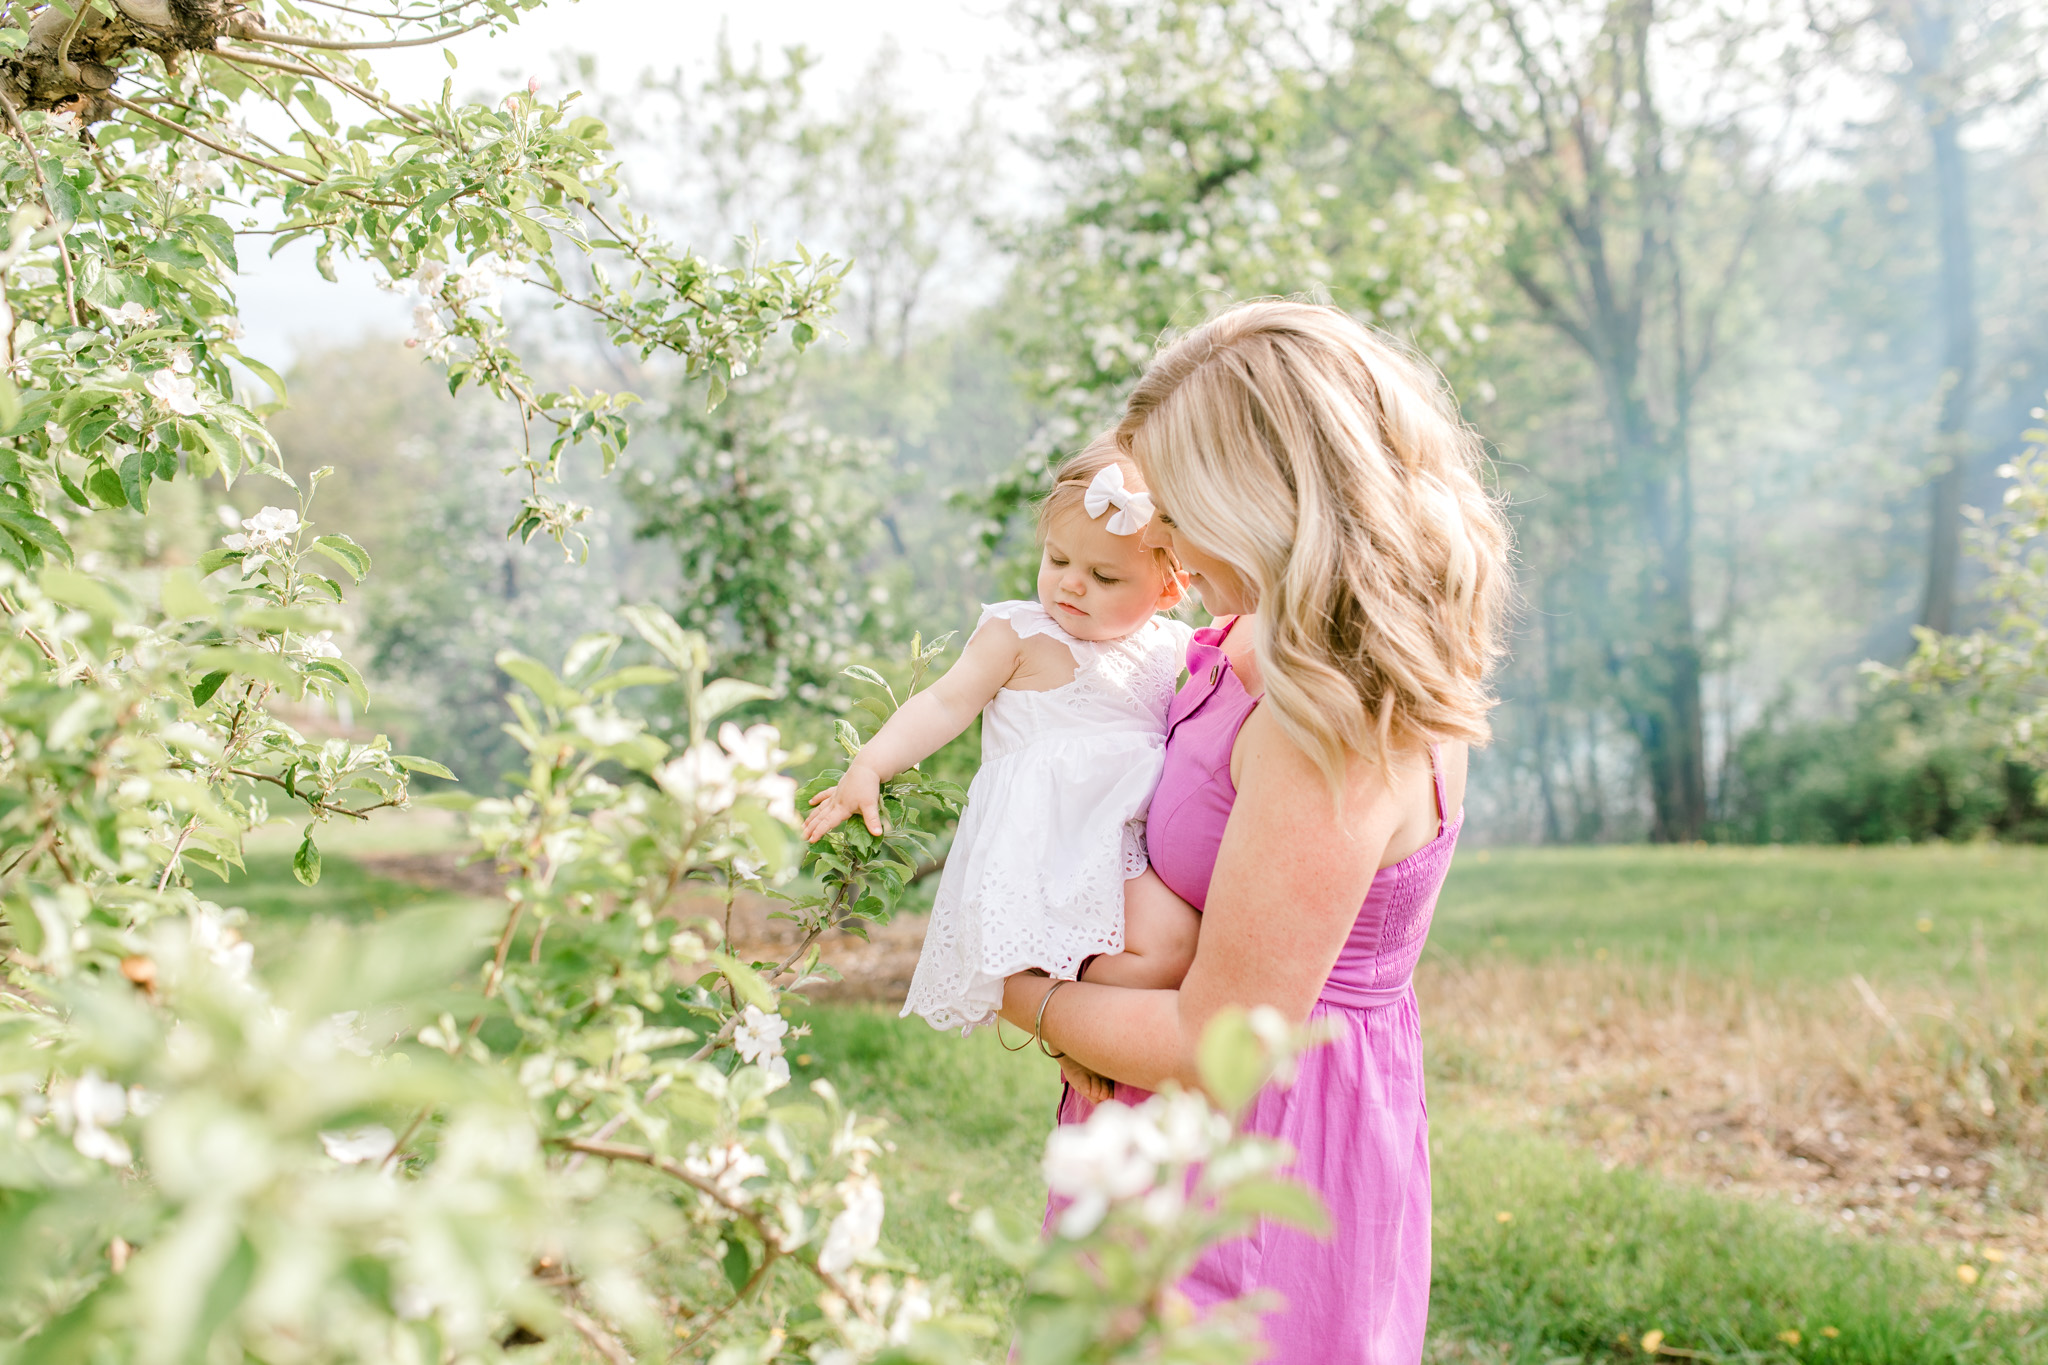 Baby Girl One Year Birthday Session at the Orchard | Spring Apple Blossom Session | Lifestyle Photography | Light &amp; Airy Photography | West Michigan Photographer